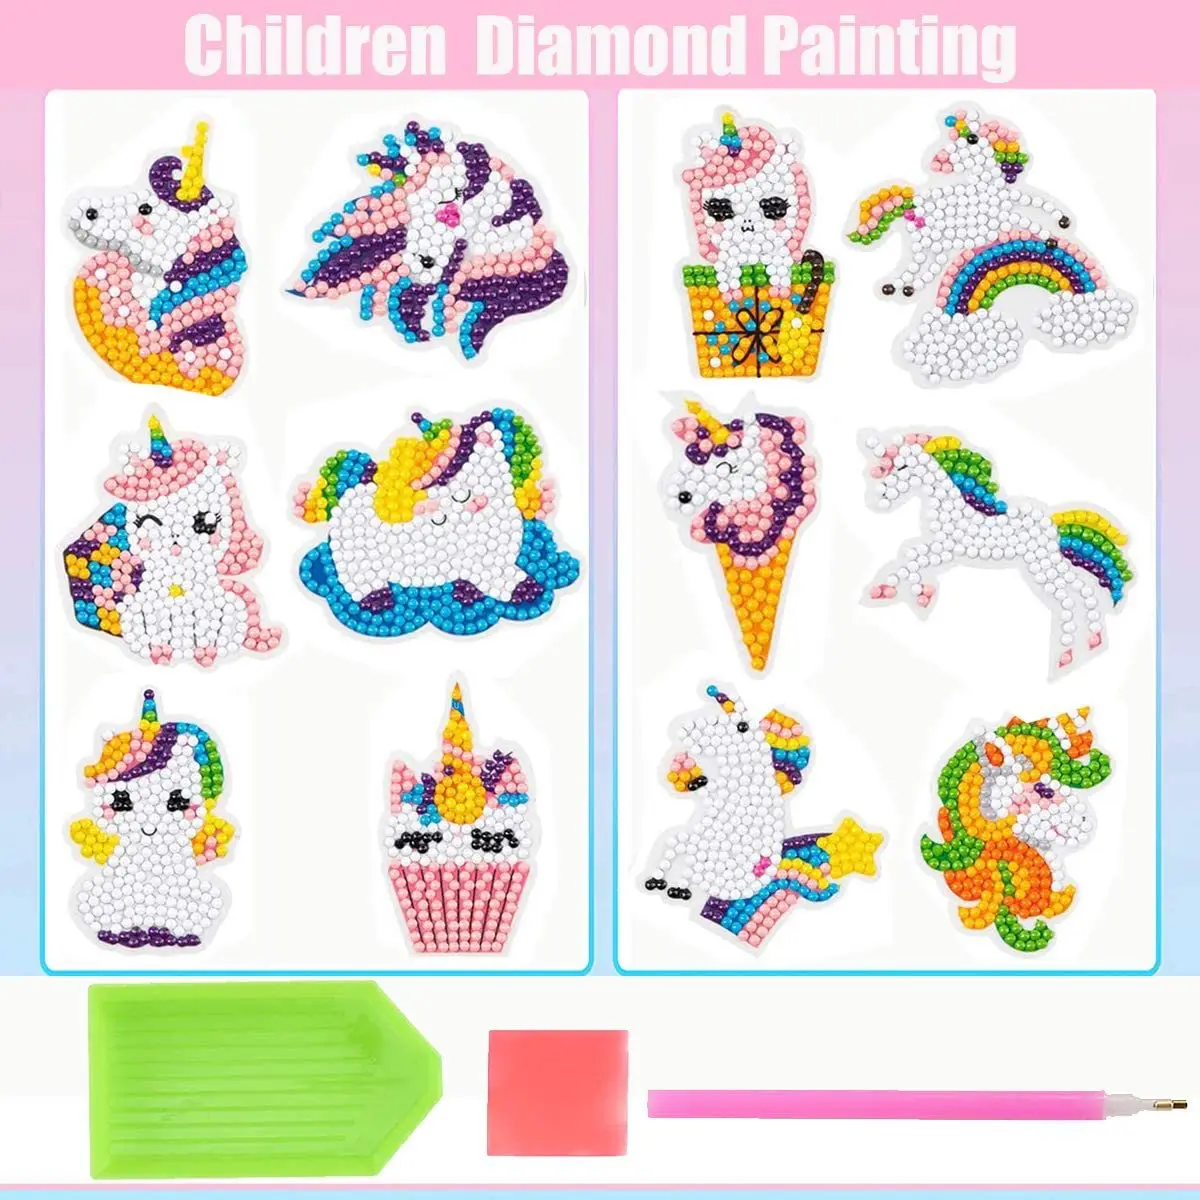 Cartoon Diamond Painting Stickers Kits for Kids DIY Full Drill Diamond Painting by Numbers Diamond Art Crafts Children Toy Gift images - 6